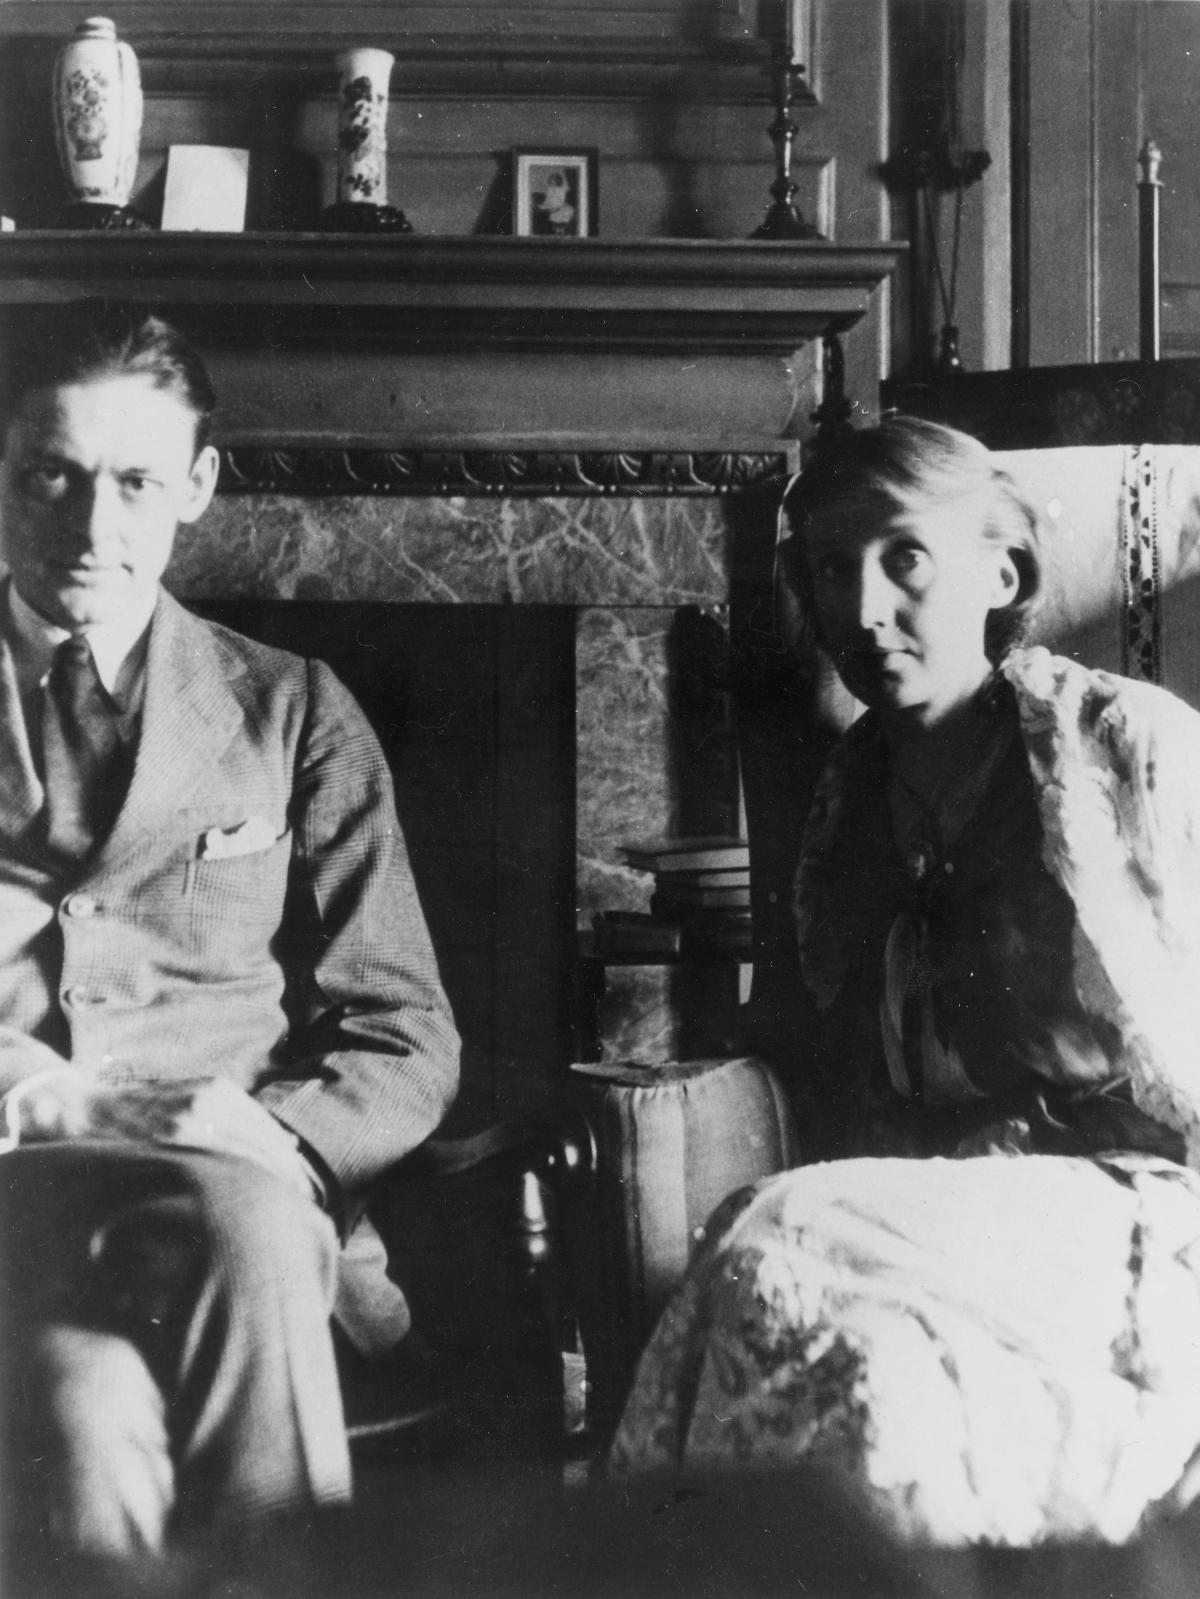 Eliot in his "four-piece suit" sitting next to Virginia Woolf